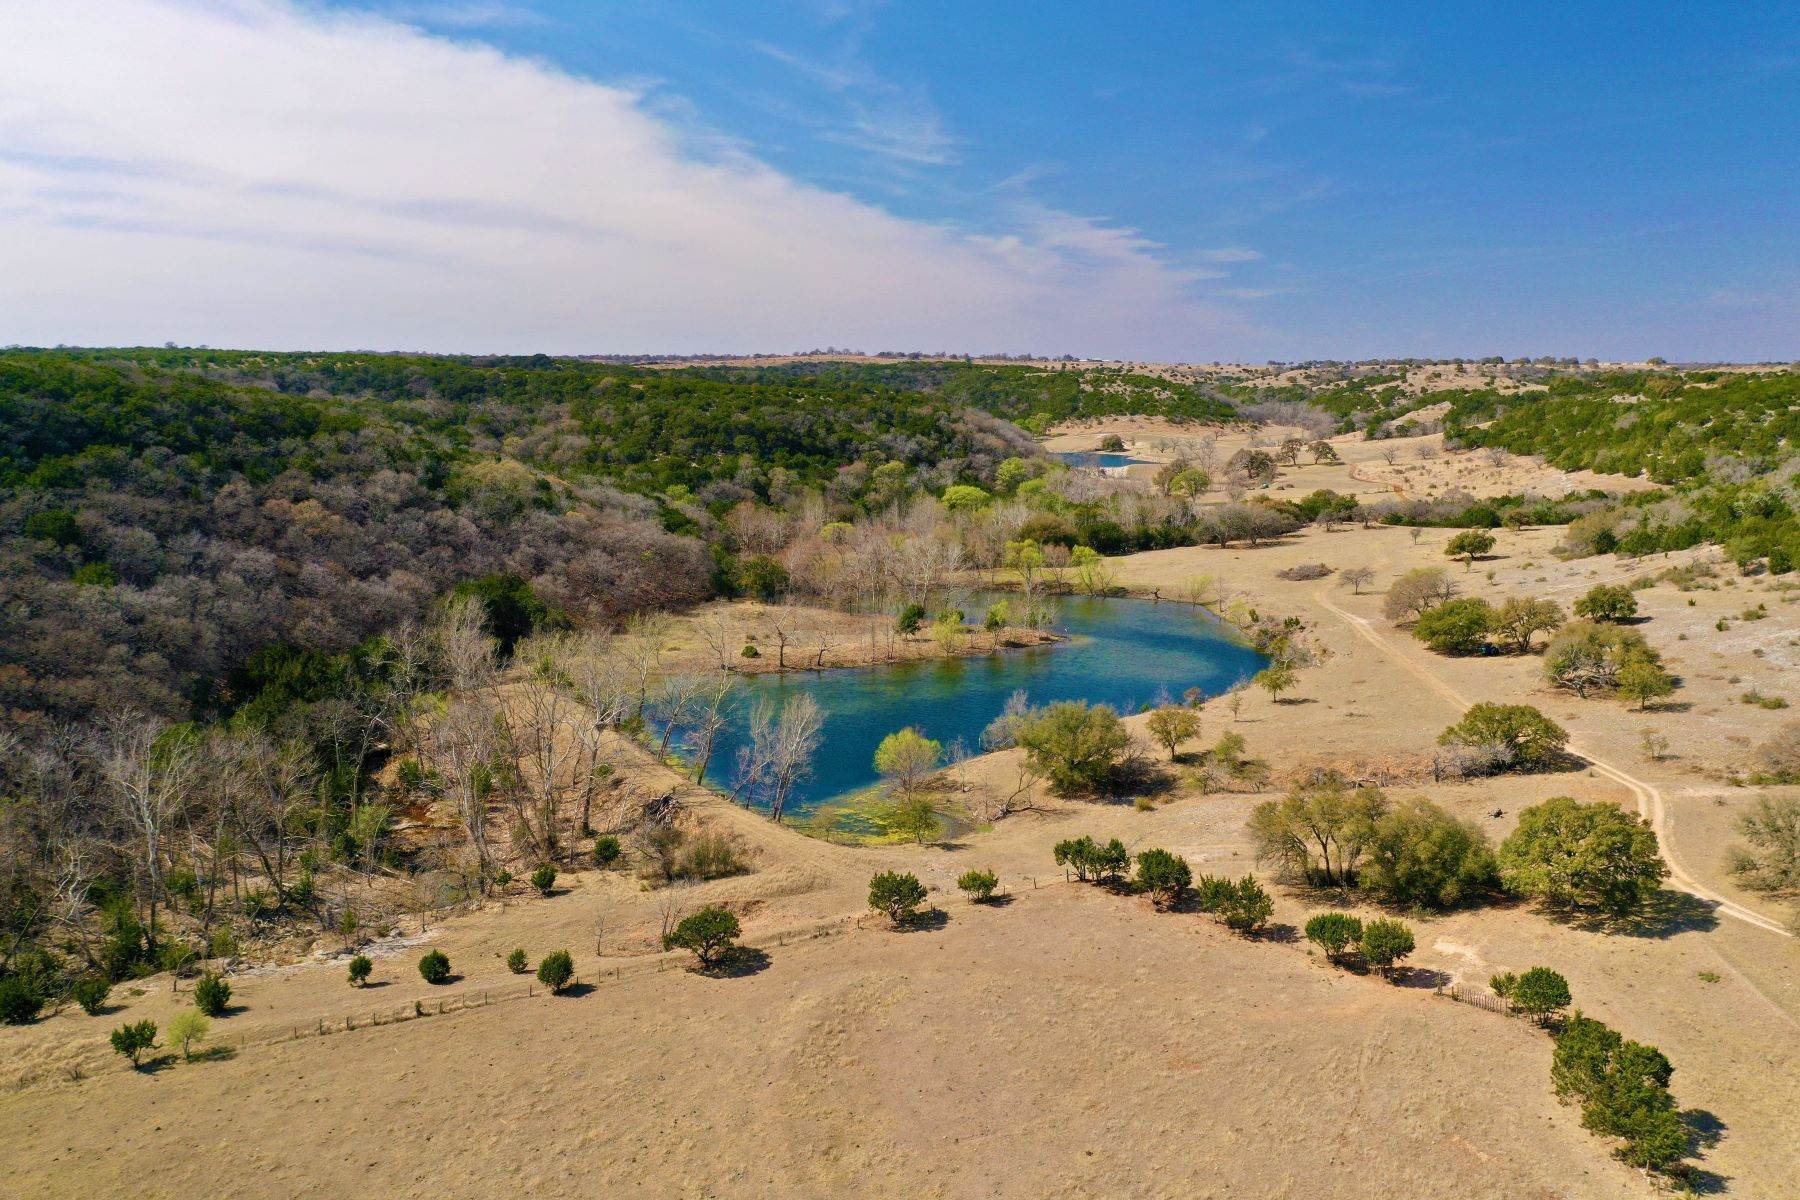 30. Farm and Ranch Properties for Sale at 2,269.85+/- Acres Less Ranch, Kendall County, Boerne, TX 78006 2,269.85+/- Acres Less Ranch, Kendall County, 650 Wild Turkey Blvd. Boerne, Texas 78006 United States